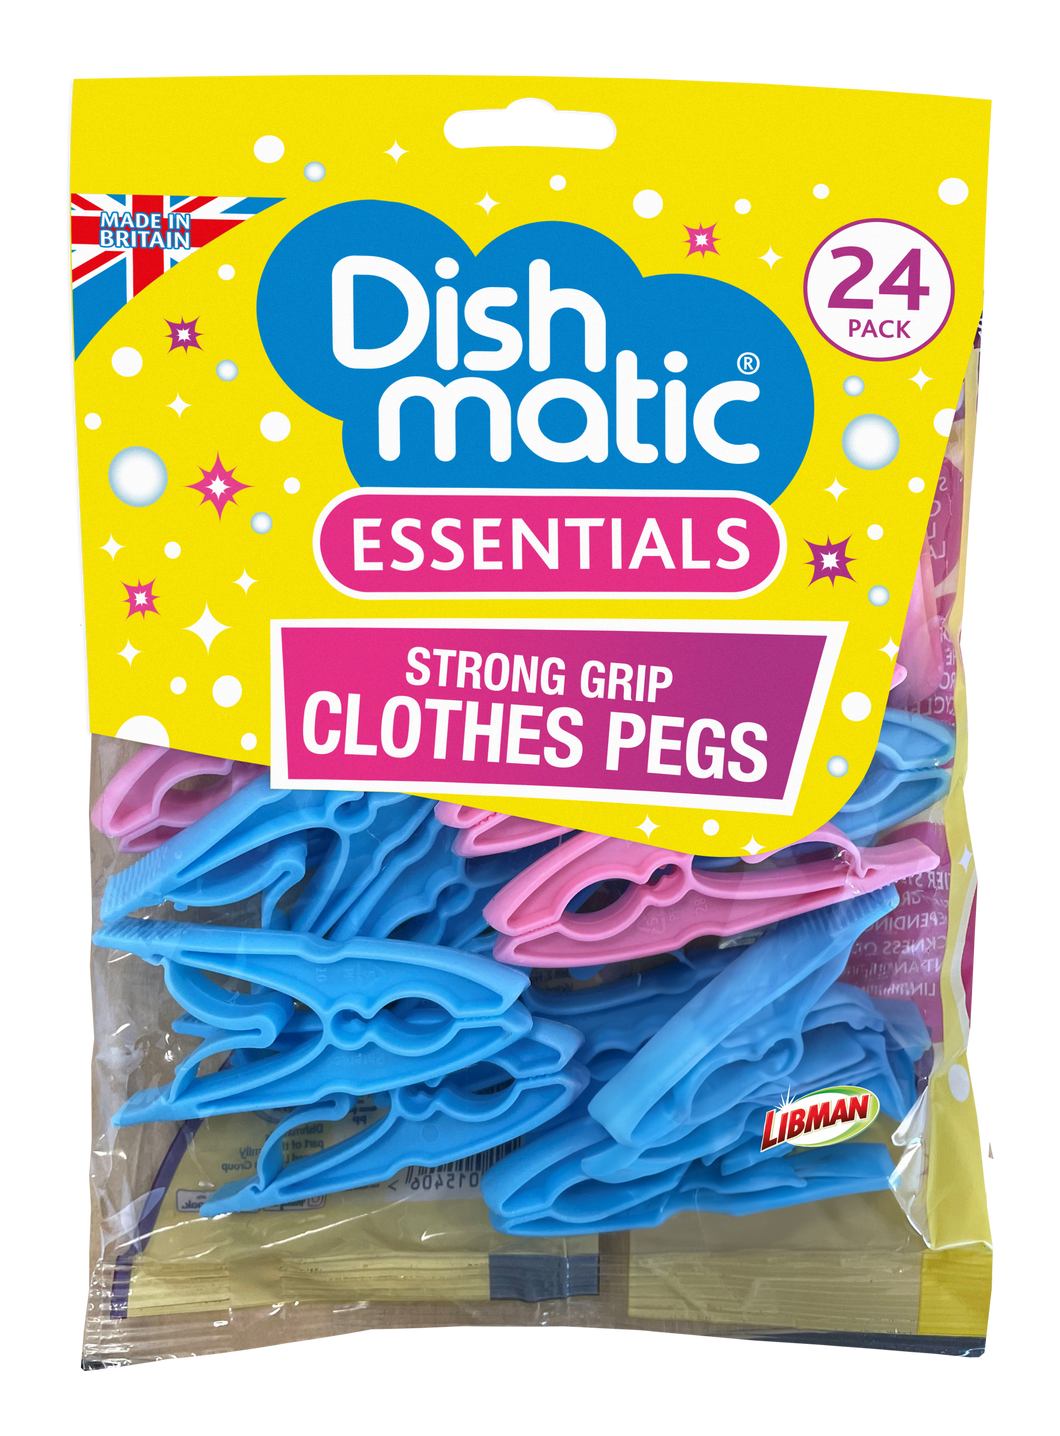 Dishmatic Essentials Strong Grip Clothes Pegs 24 Pack